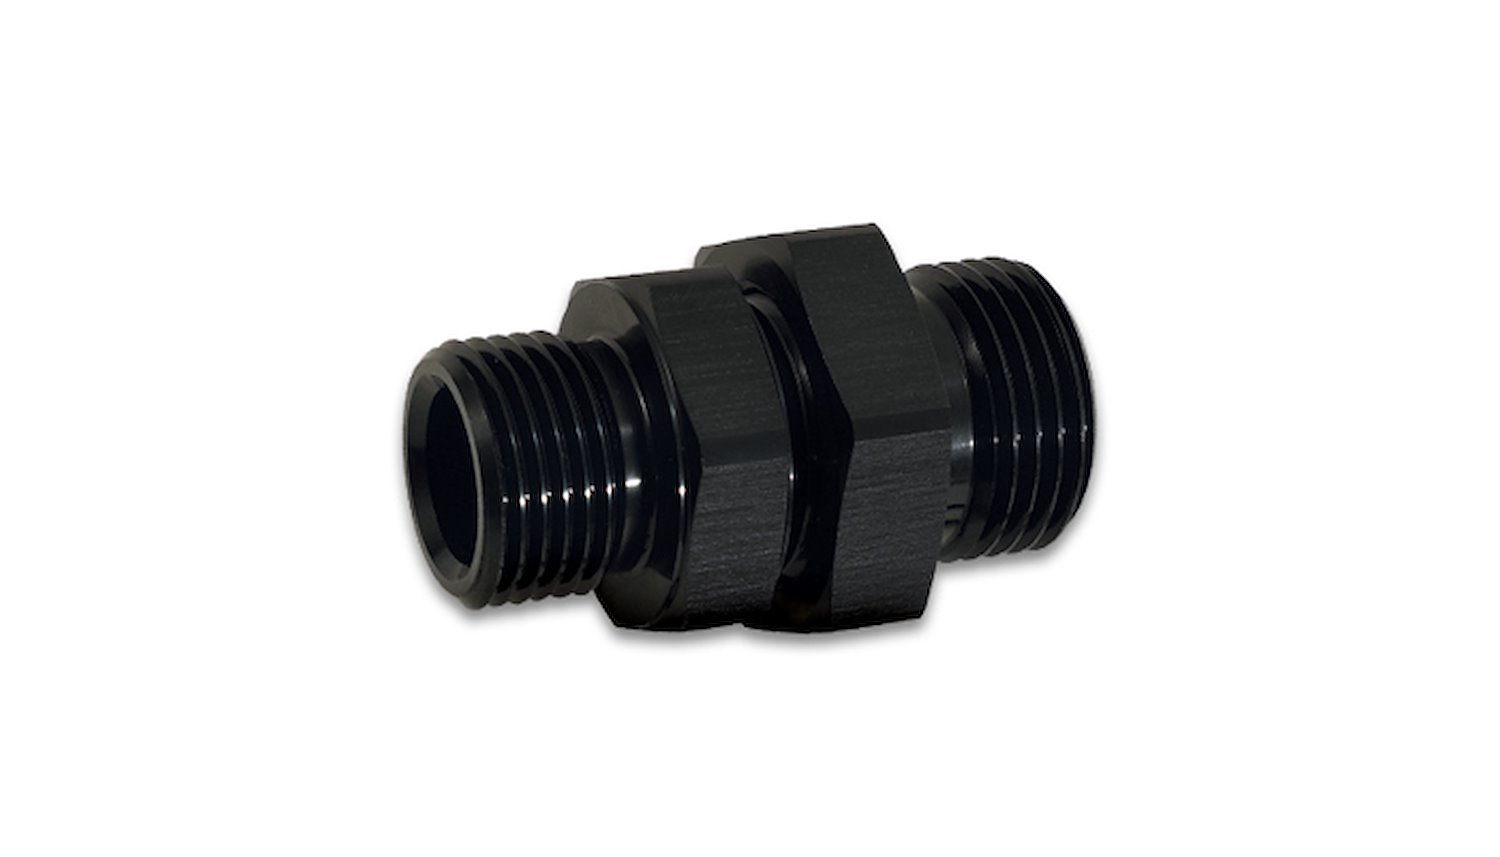 16980 -6 AN O-Ring Male to -6 AN O-Ring Male Union Adapter Fitting